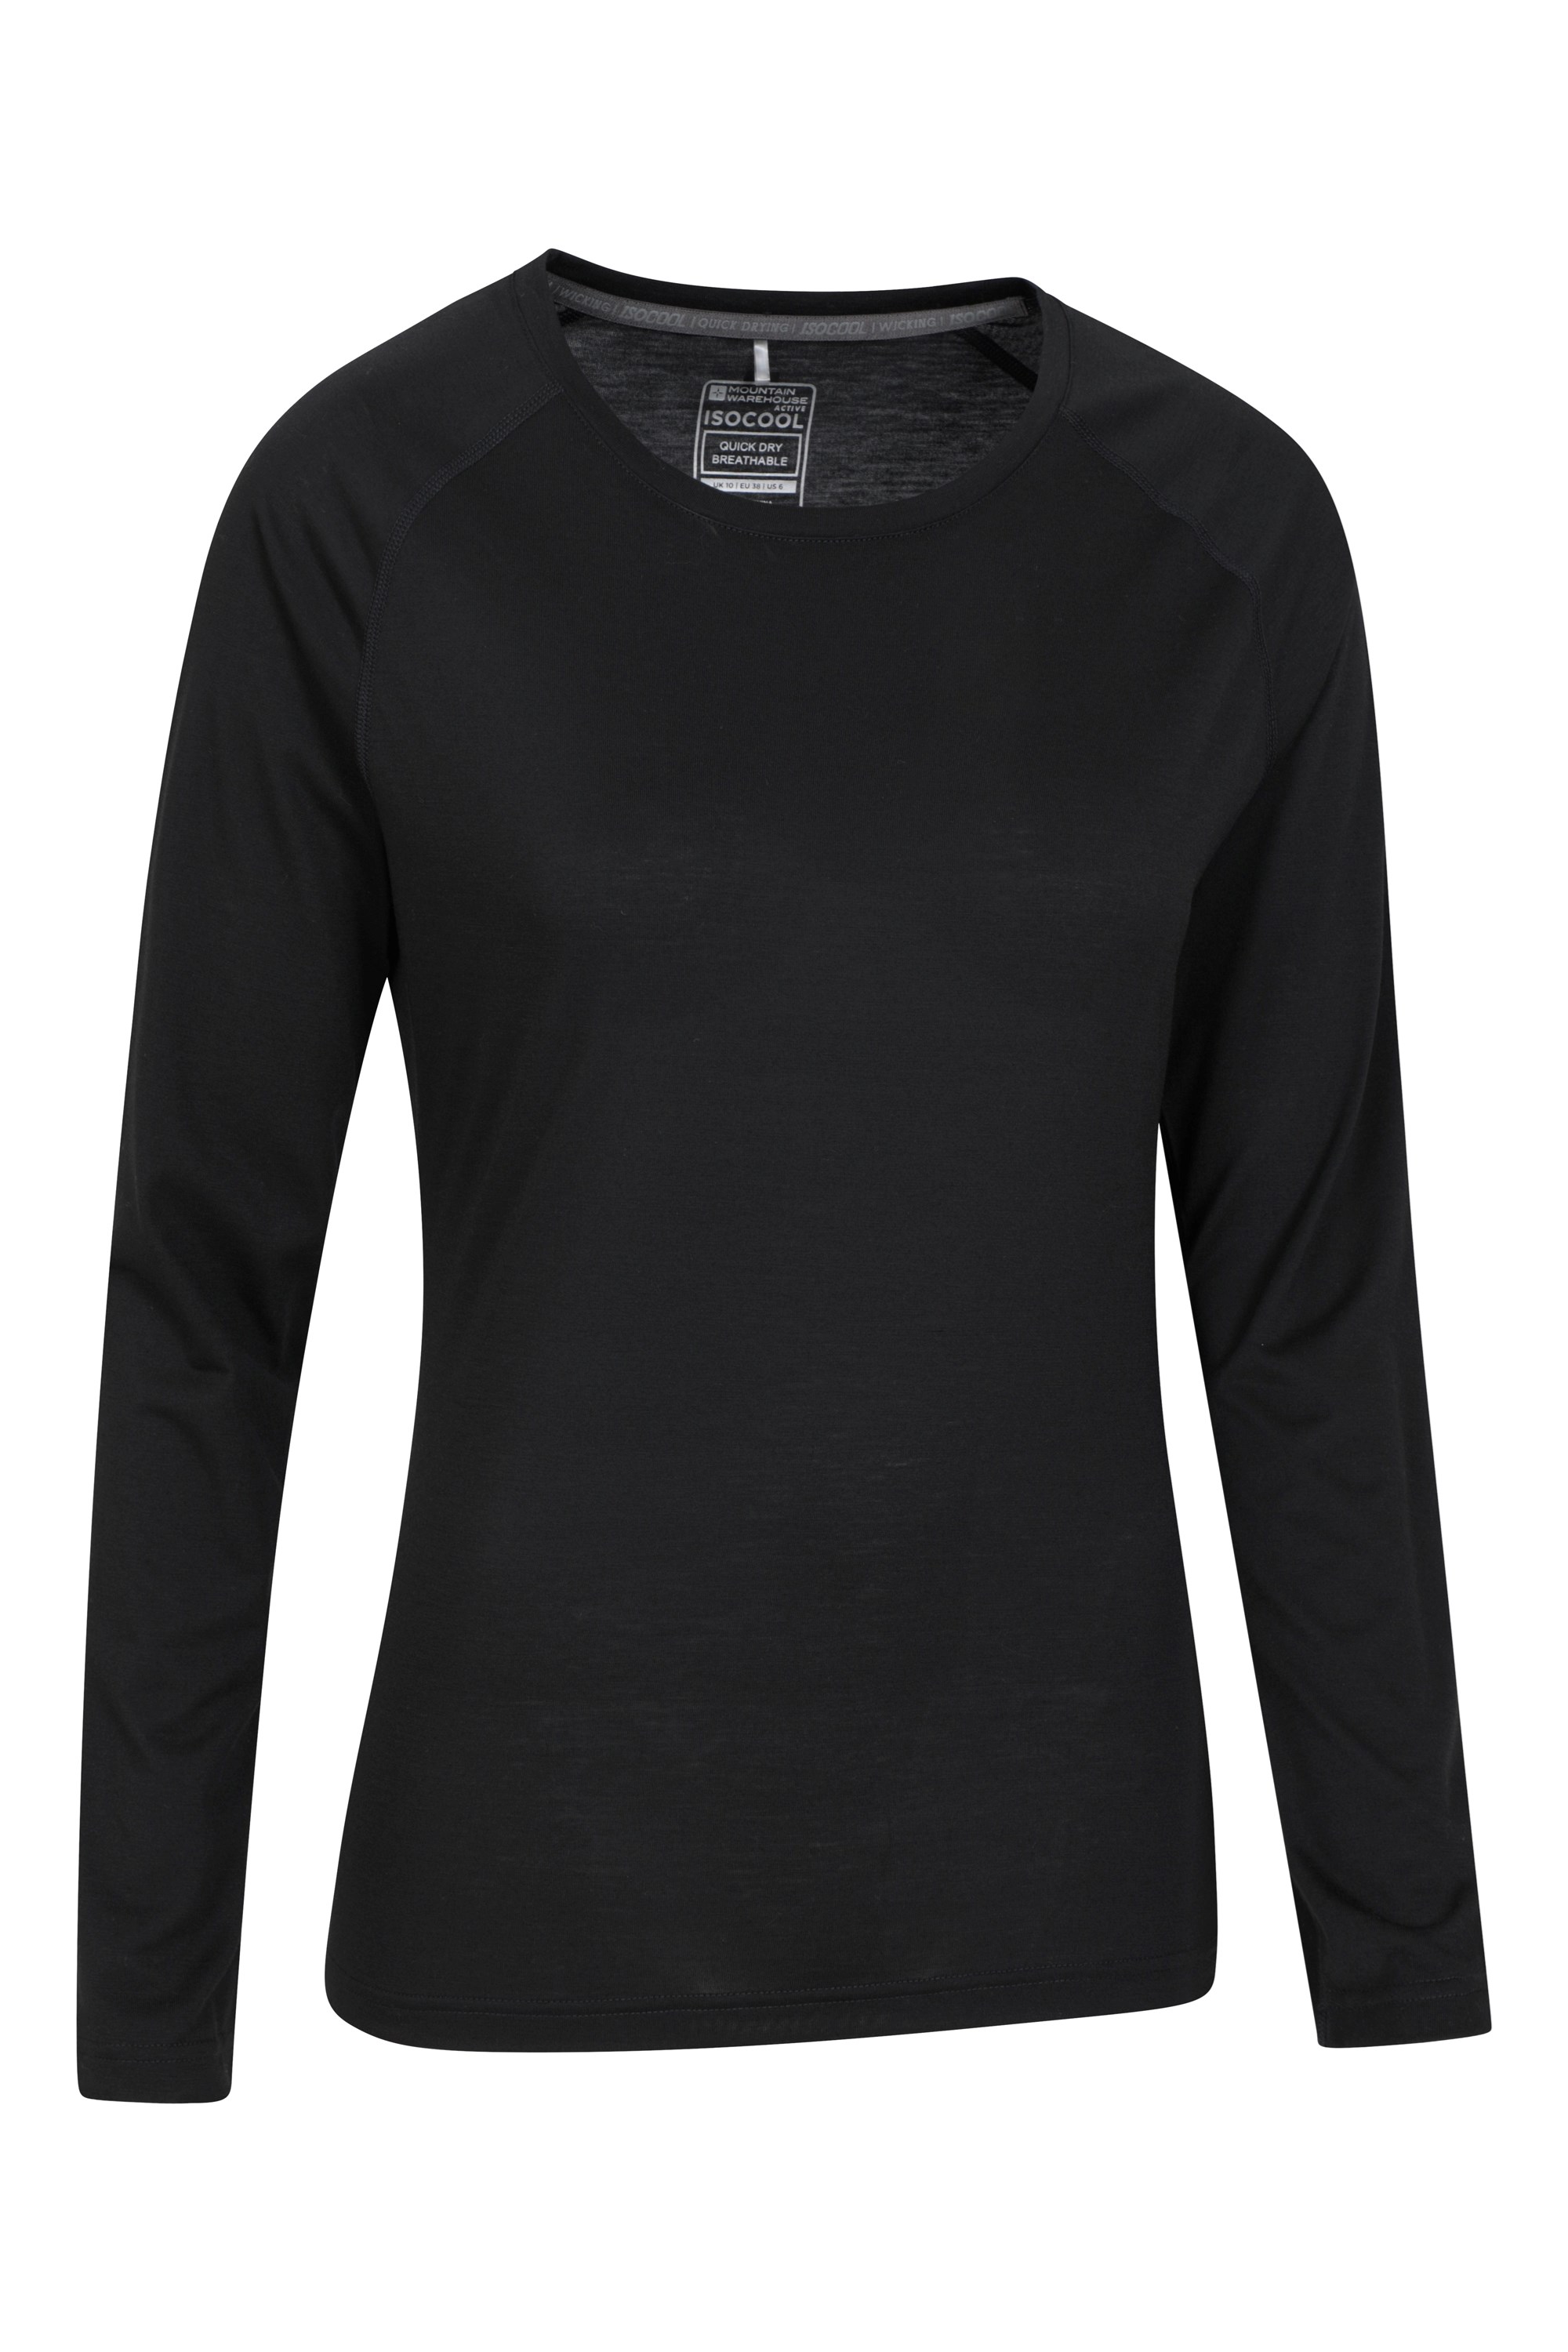 Quick Dry Womens Long Sleeve Top | Mountain Warehouse US